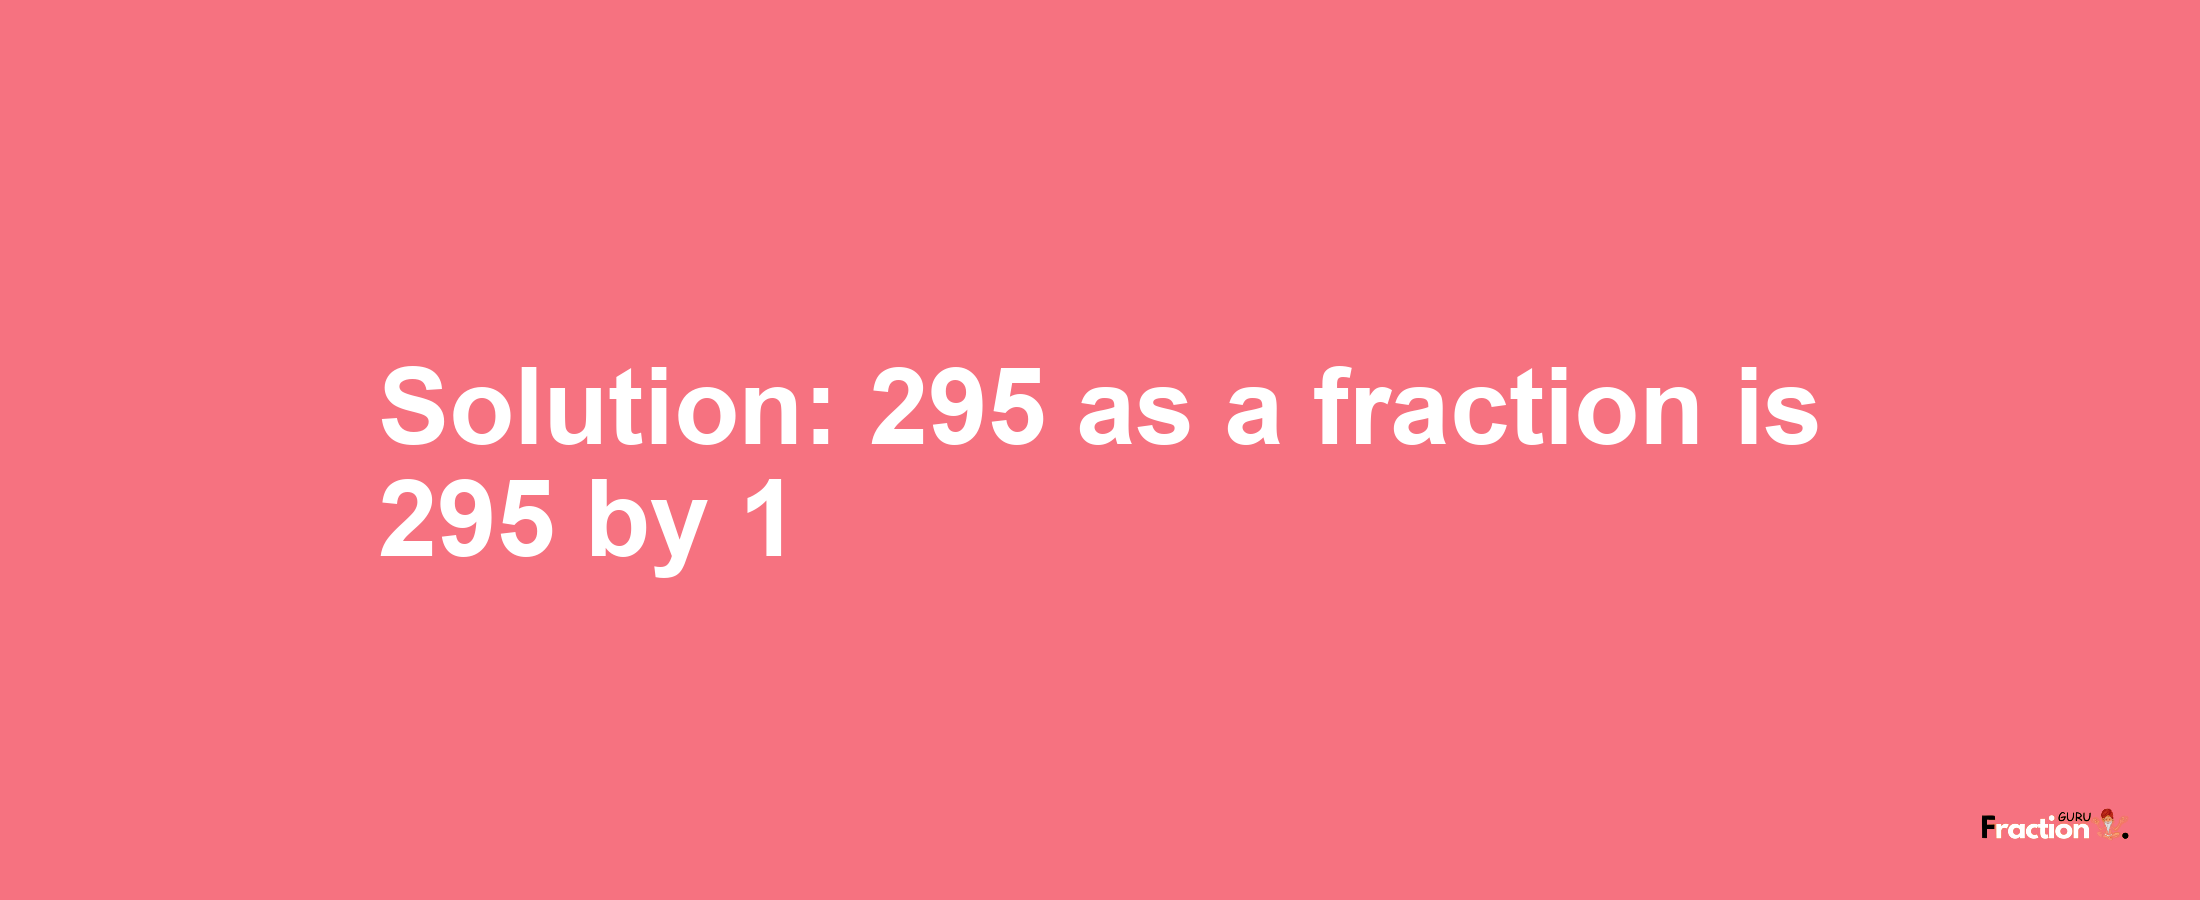 Solution:295 as a fraction is 295/1